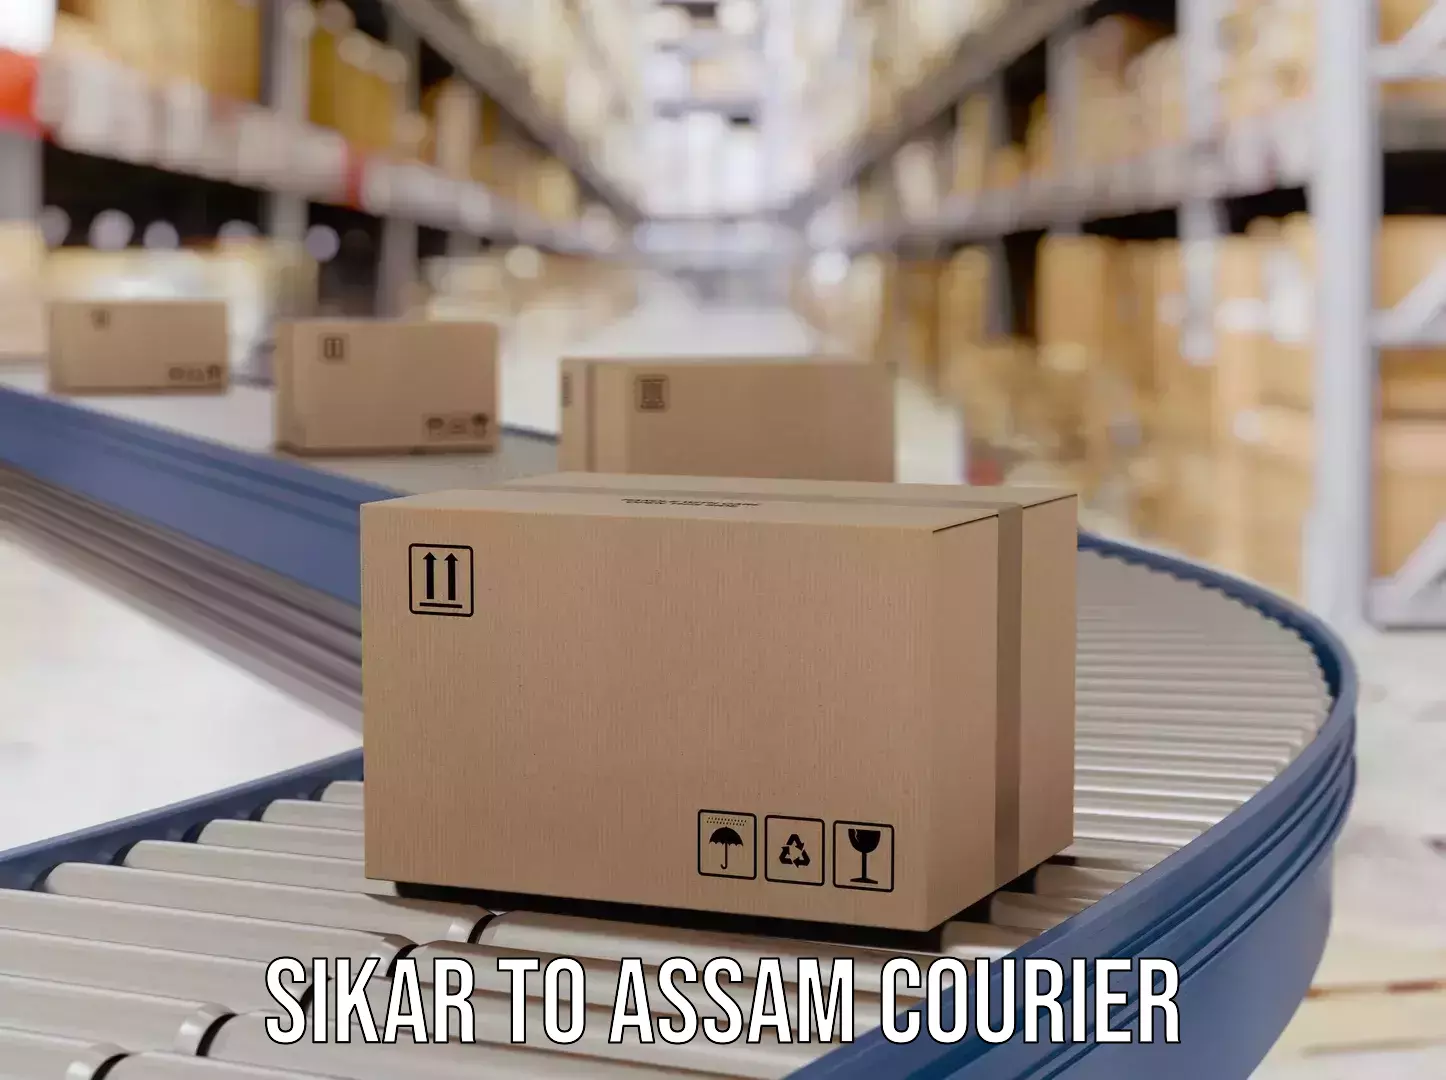 Professional courier handling Sikar to Dibrugarh